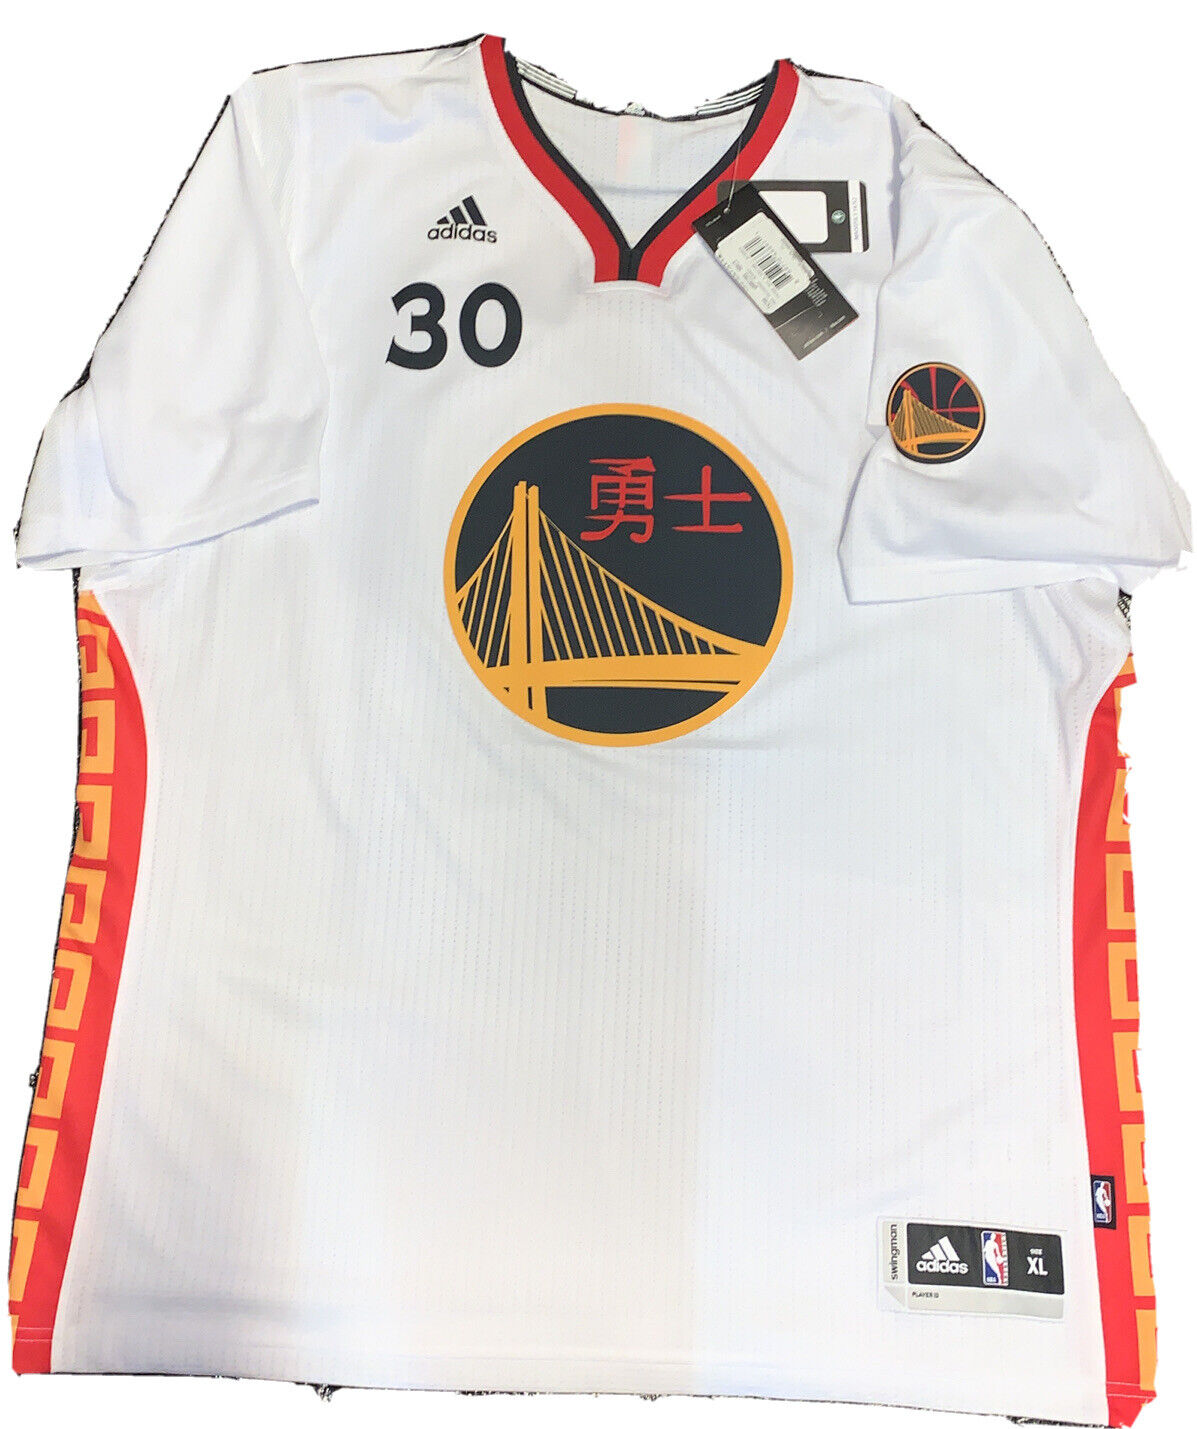 adidas+Golden+State+Warriors+Stephen+Curry+30+White+2017+Chinese+